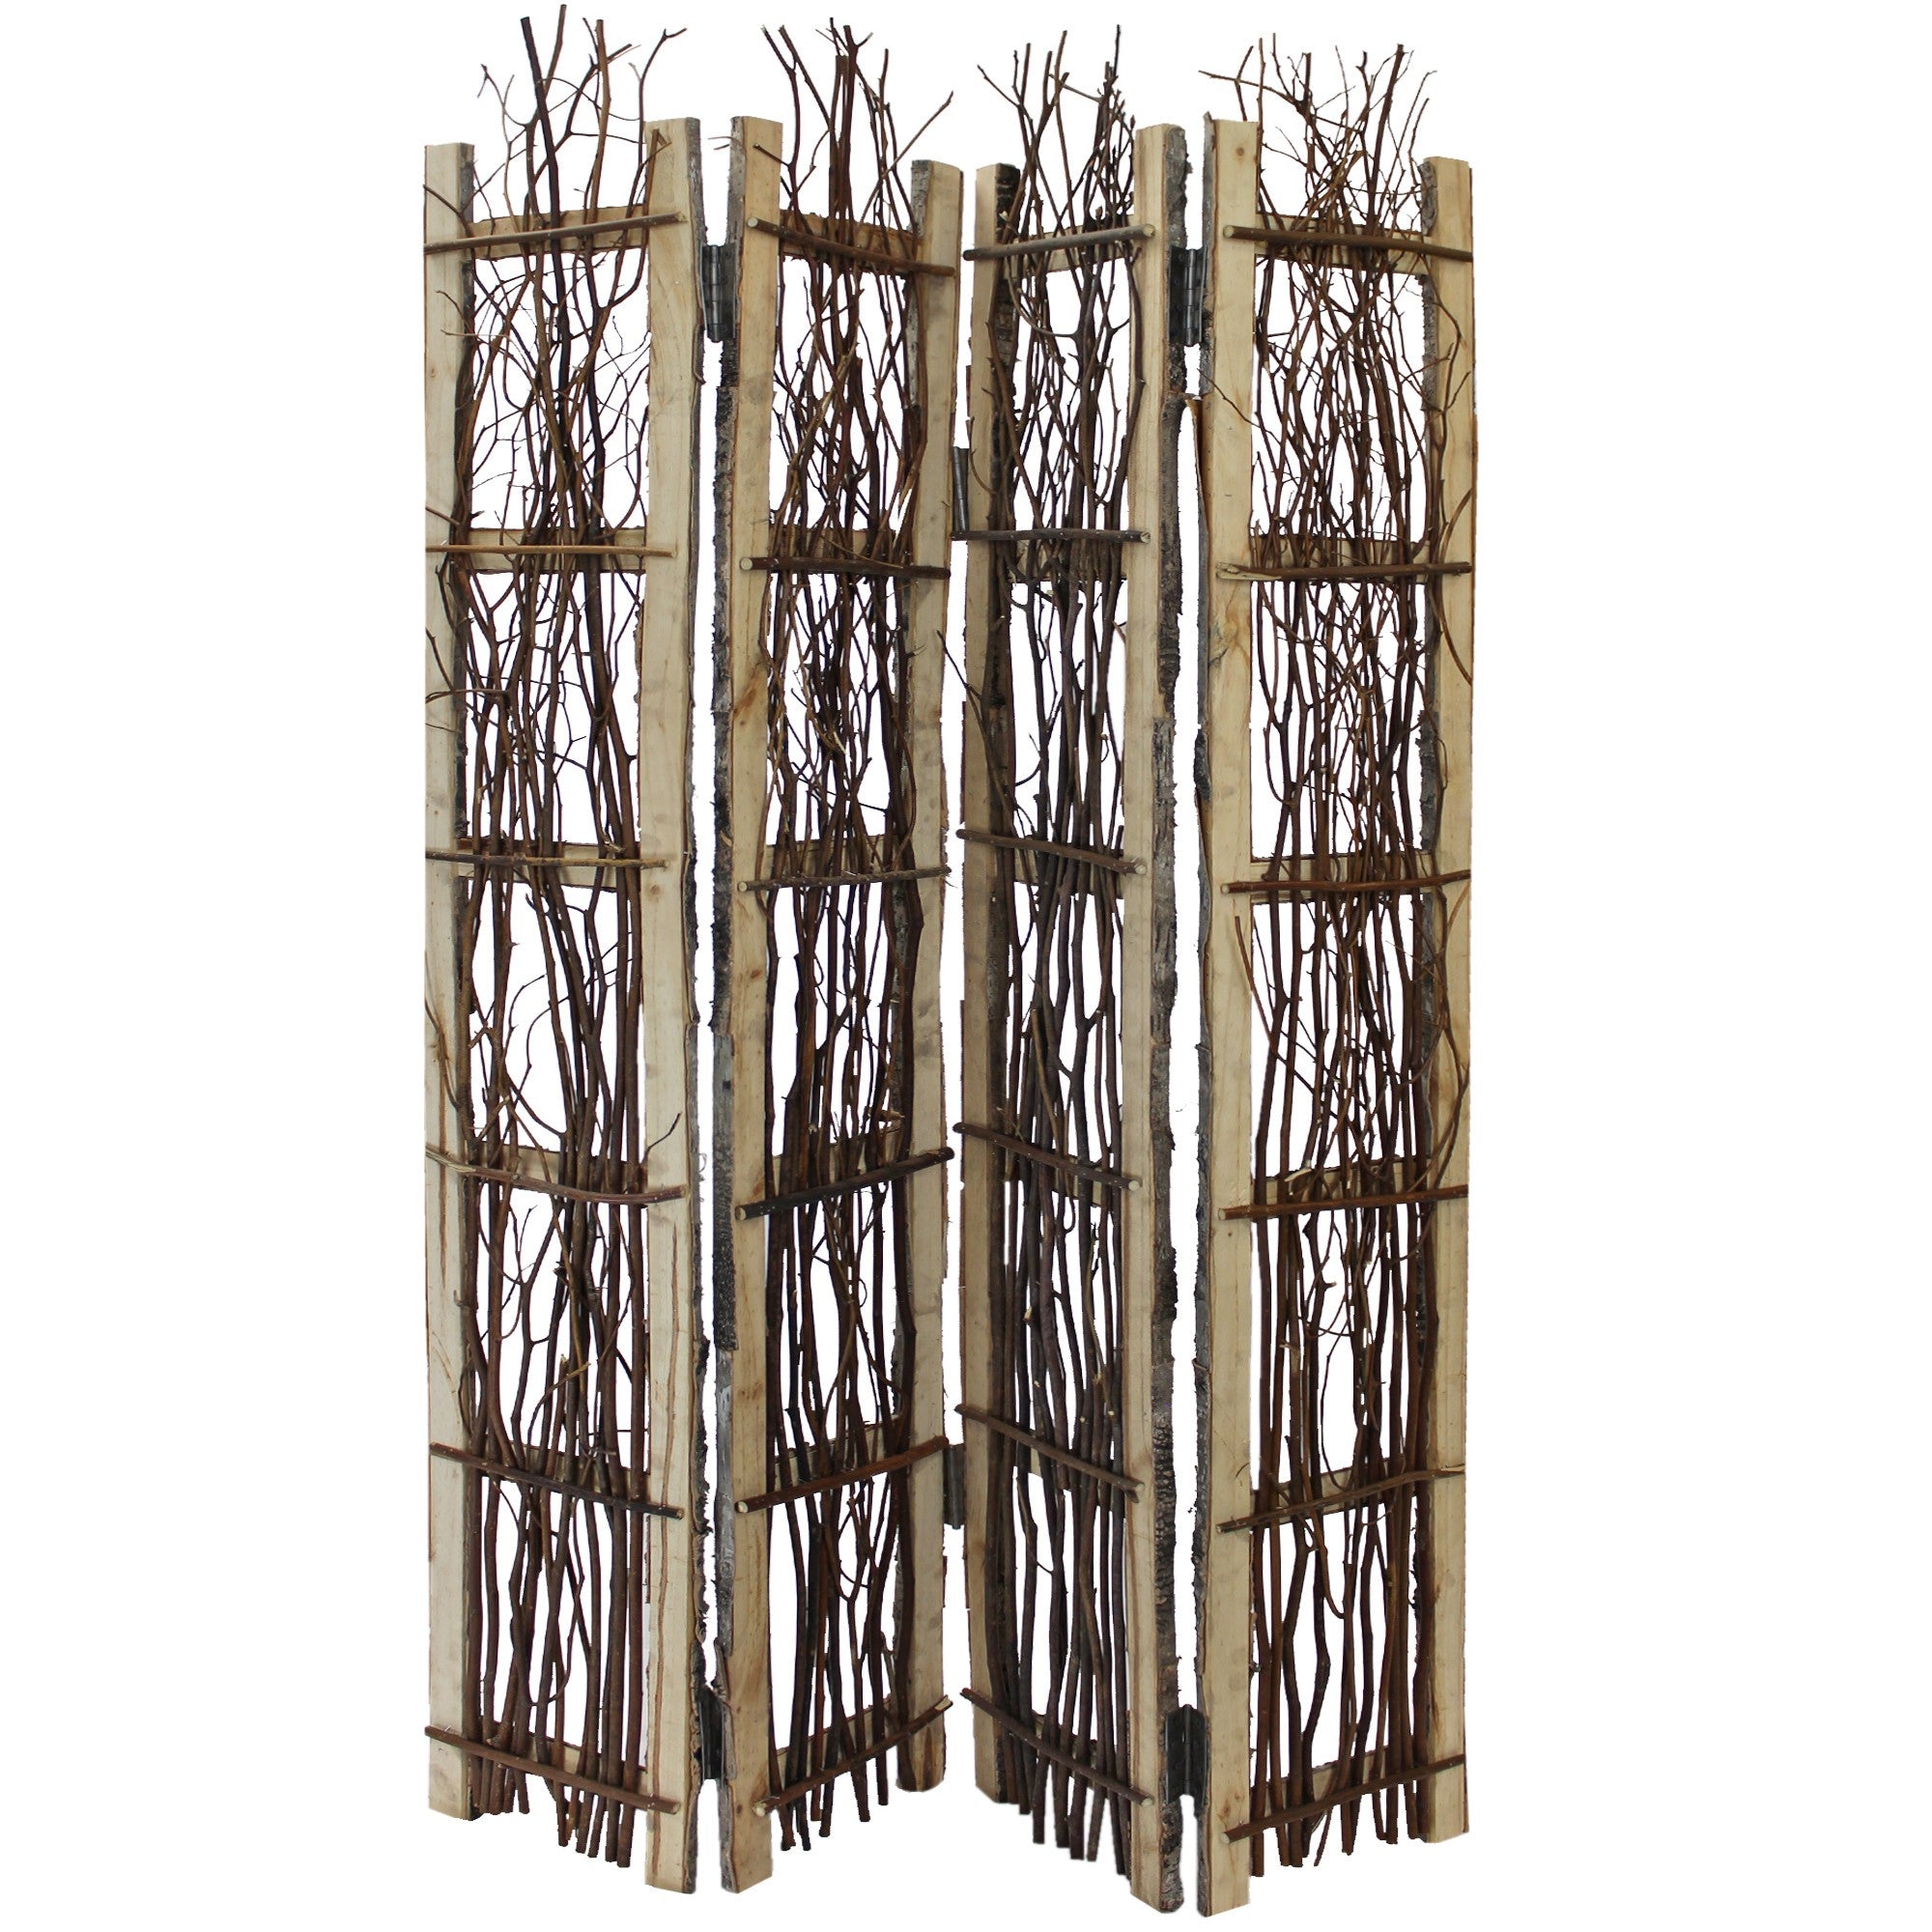 Earthy Birch and Twig Four Panel Room Divider Screen